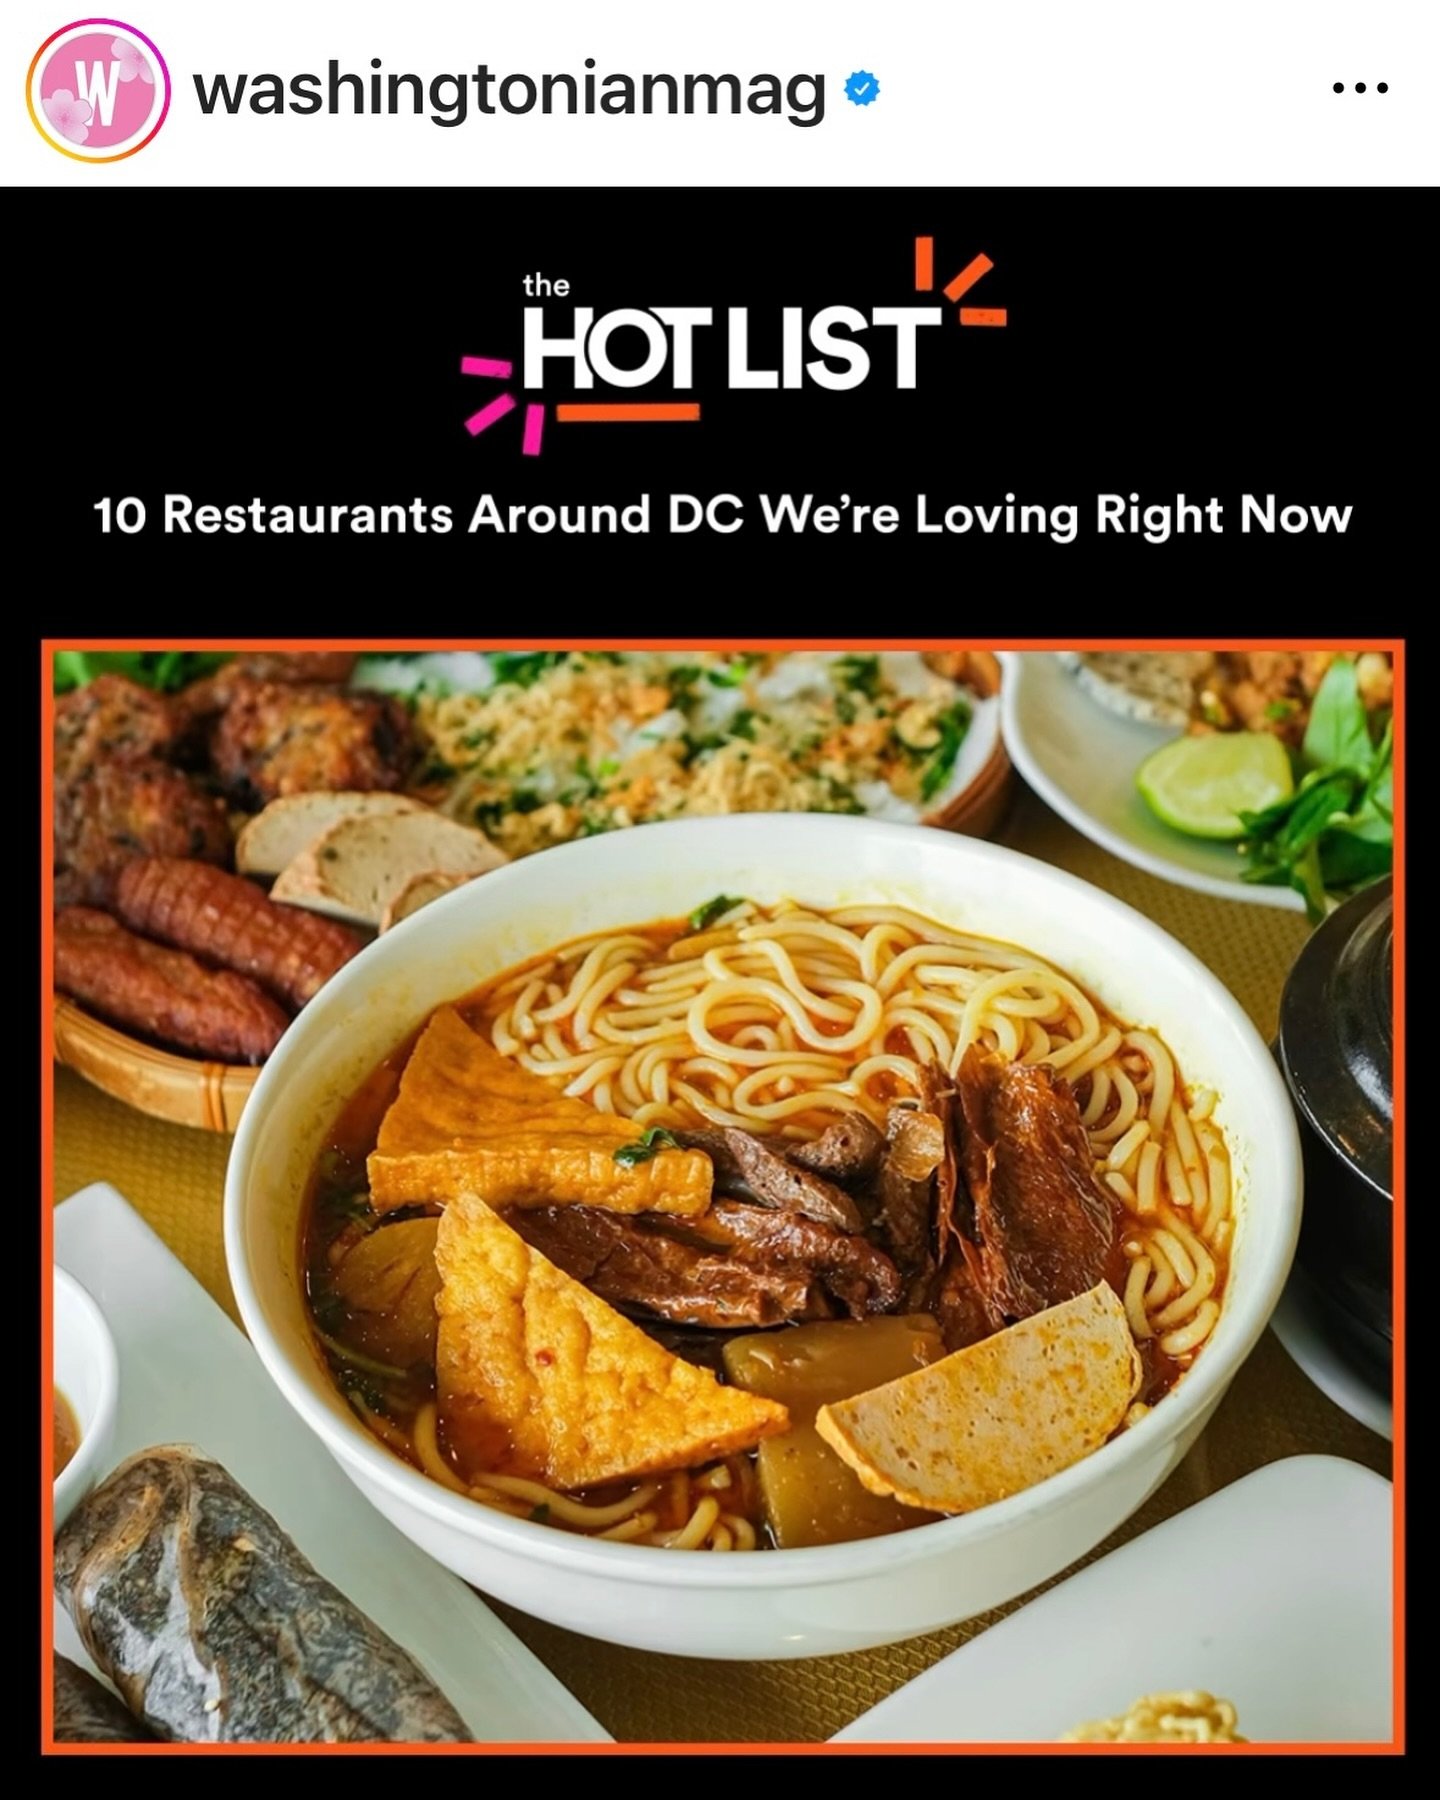 It&rsquo;s our second month on the @washingtonianmag Hot List!! Thank you so much!! And yes that&rsquo;s Chay&rsquo;s best selling (N2) B&Uacute;N B&Ograve; HUẾ | Spicy Huế Noodle Soup! Photo by @foodooboos